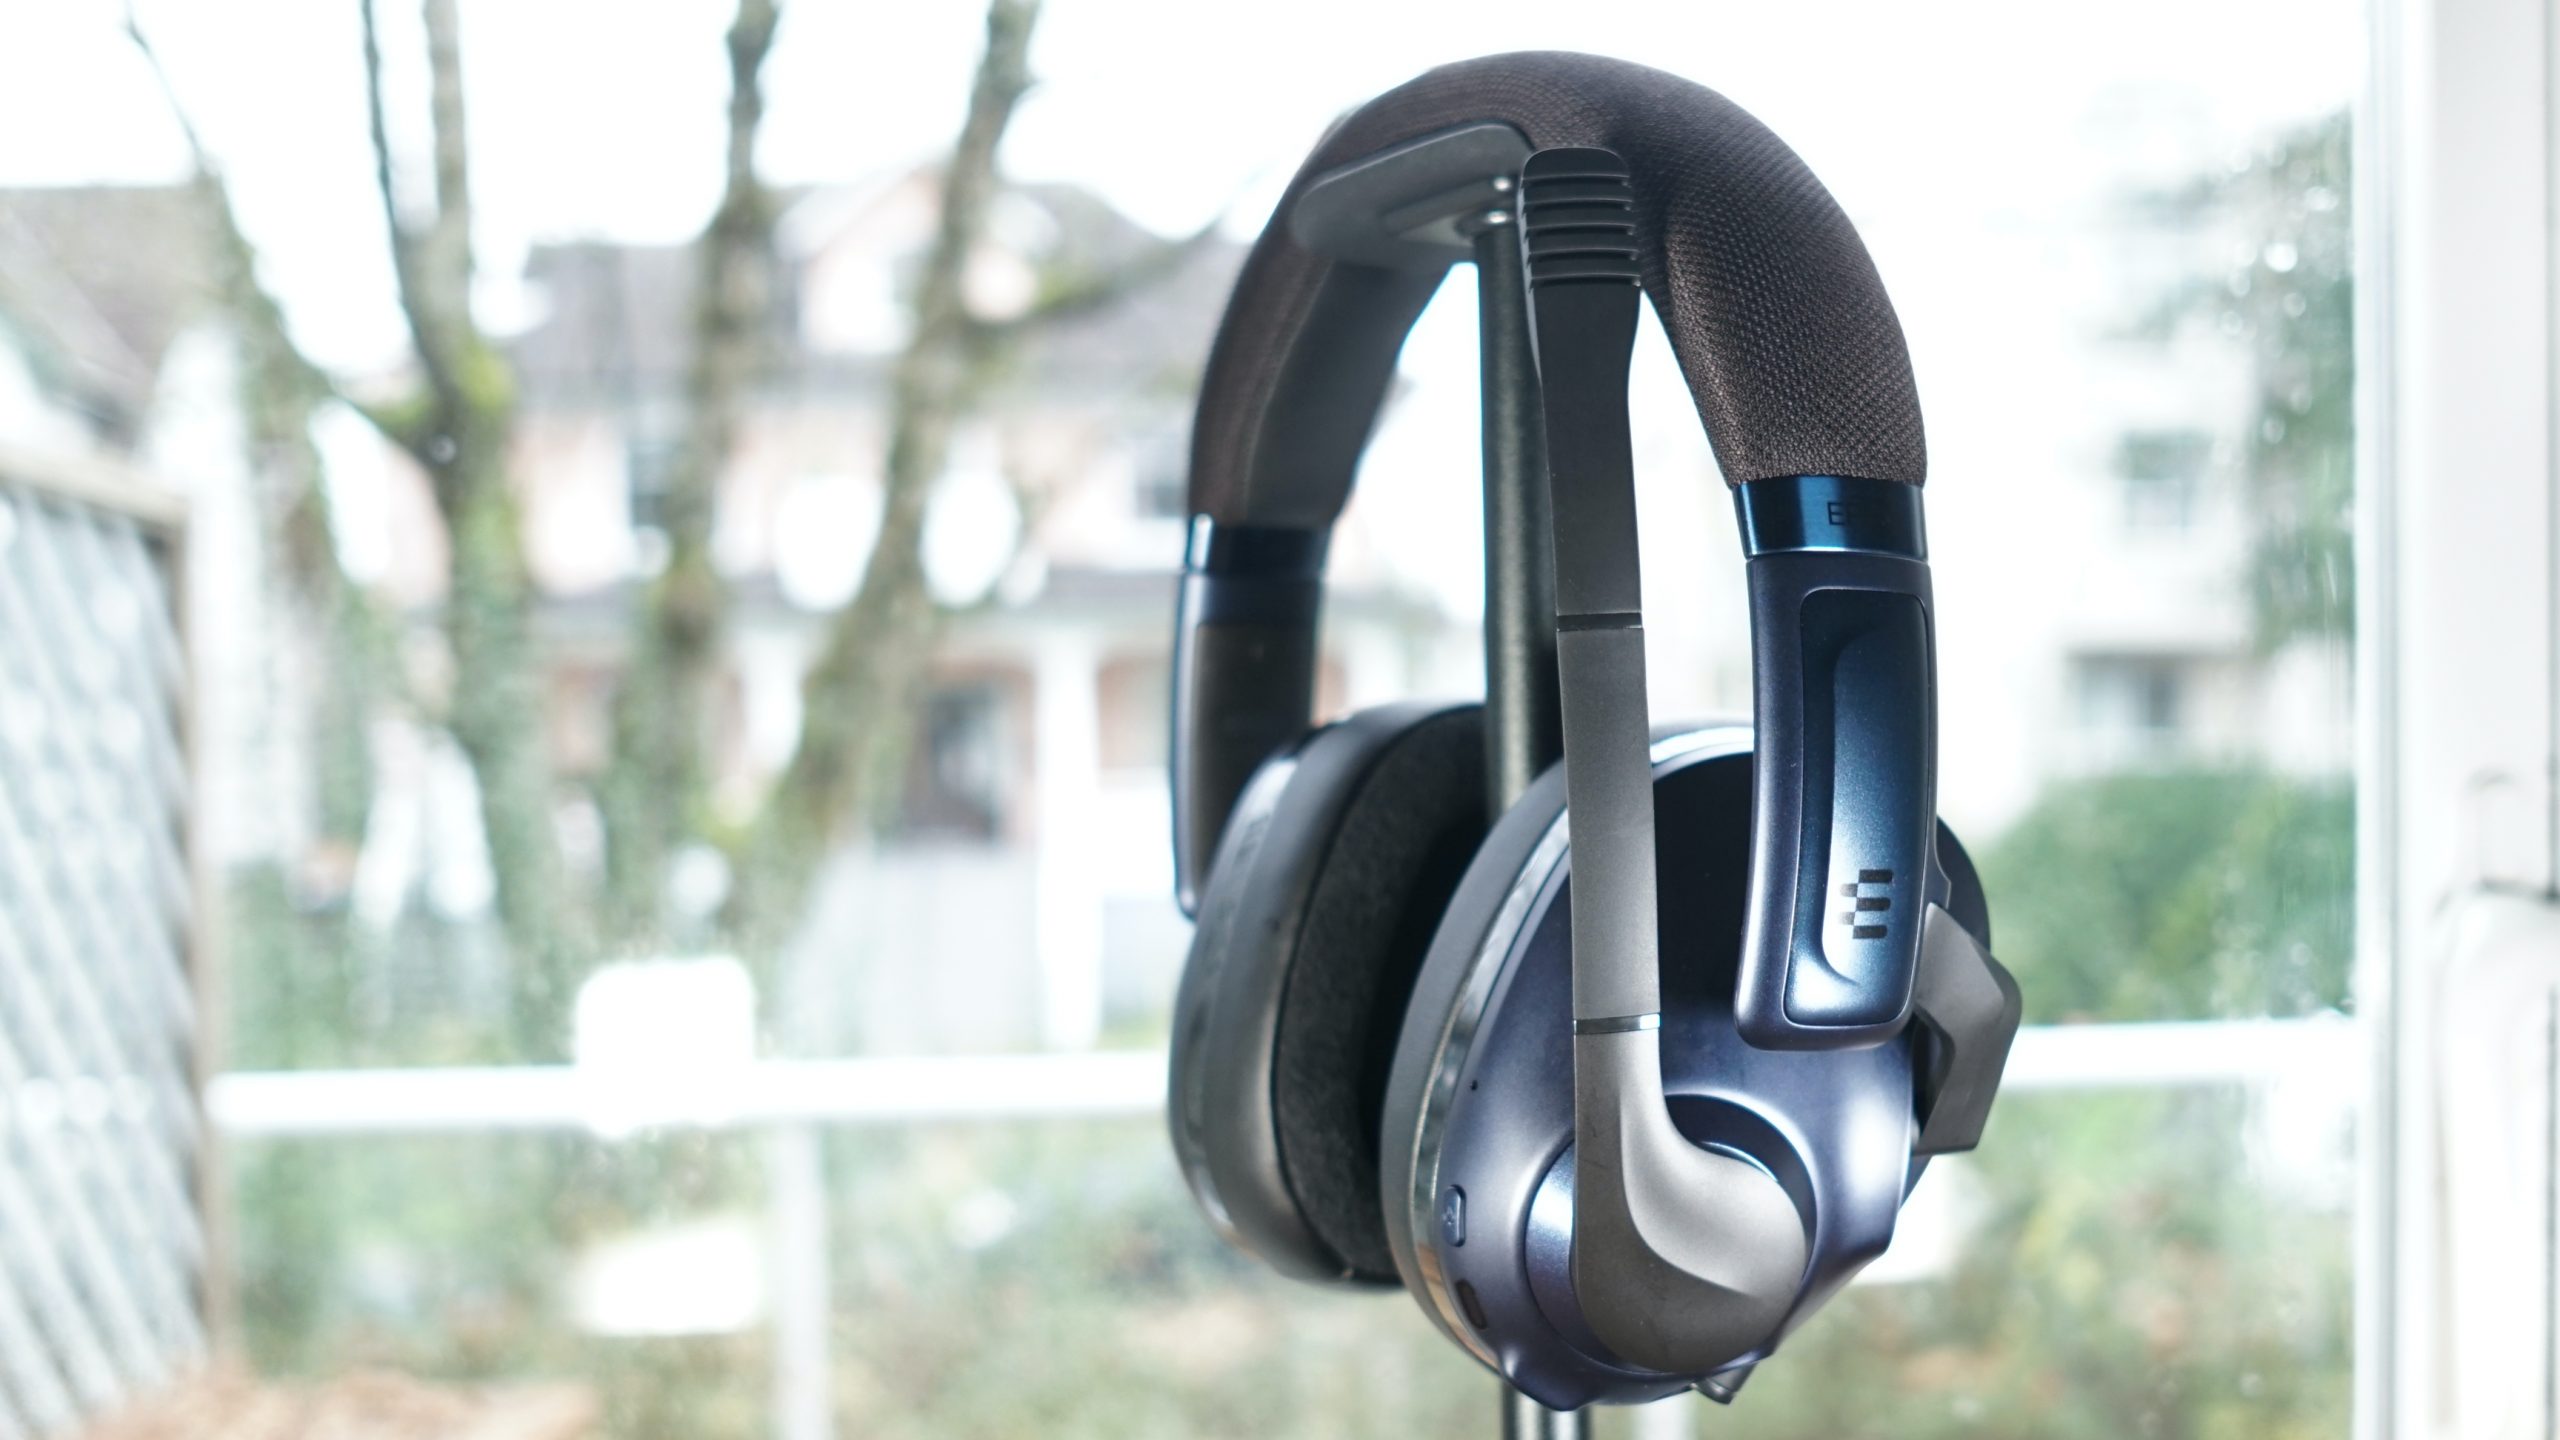 H3 Hybrid and H6 Pro  Gaming Headsets Review